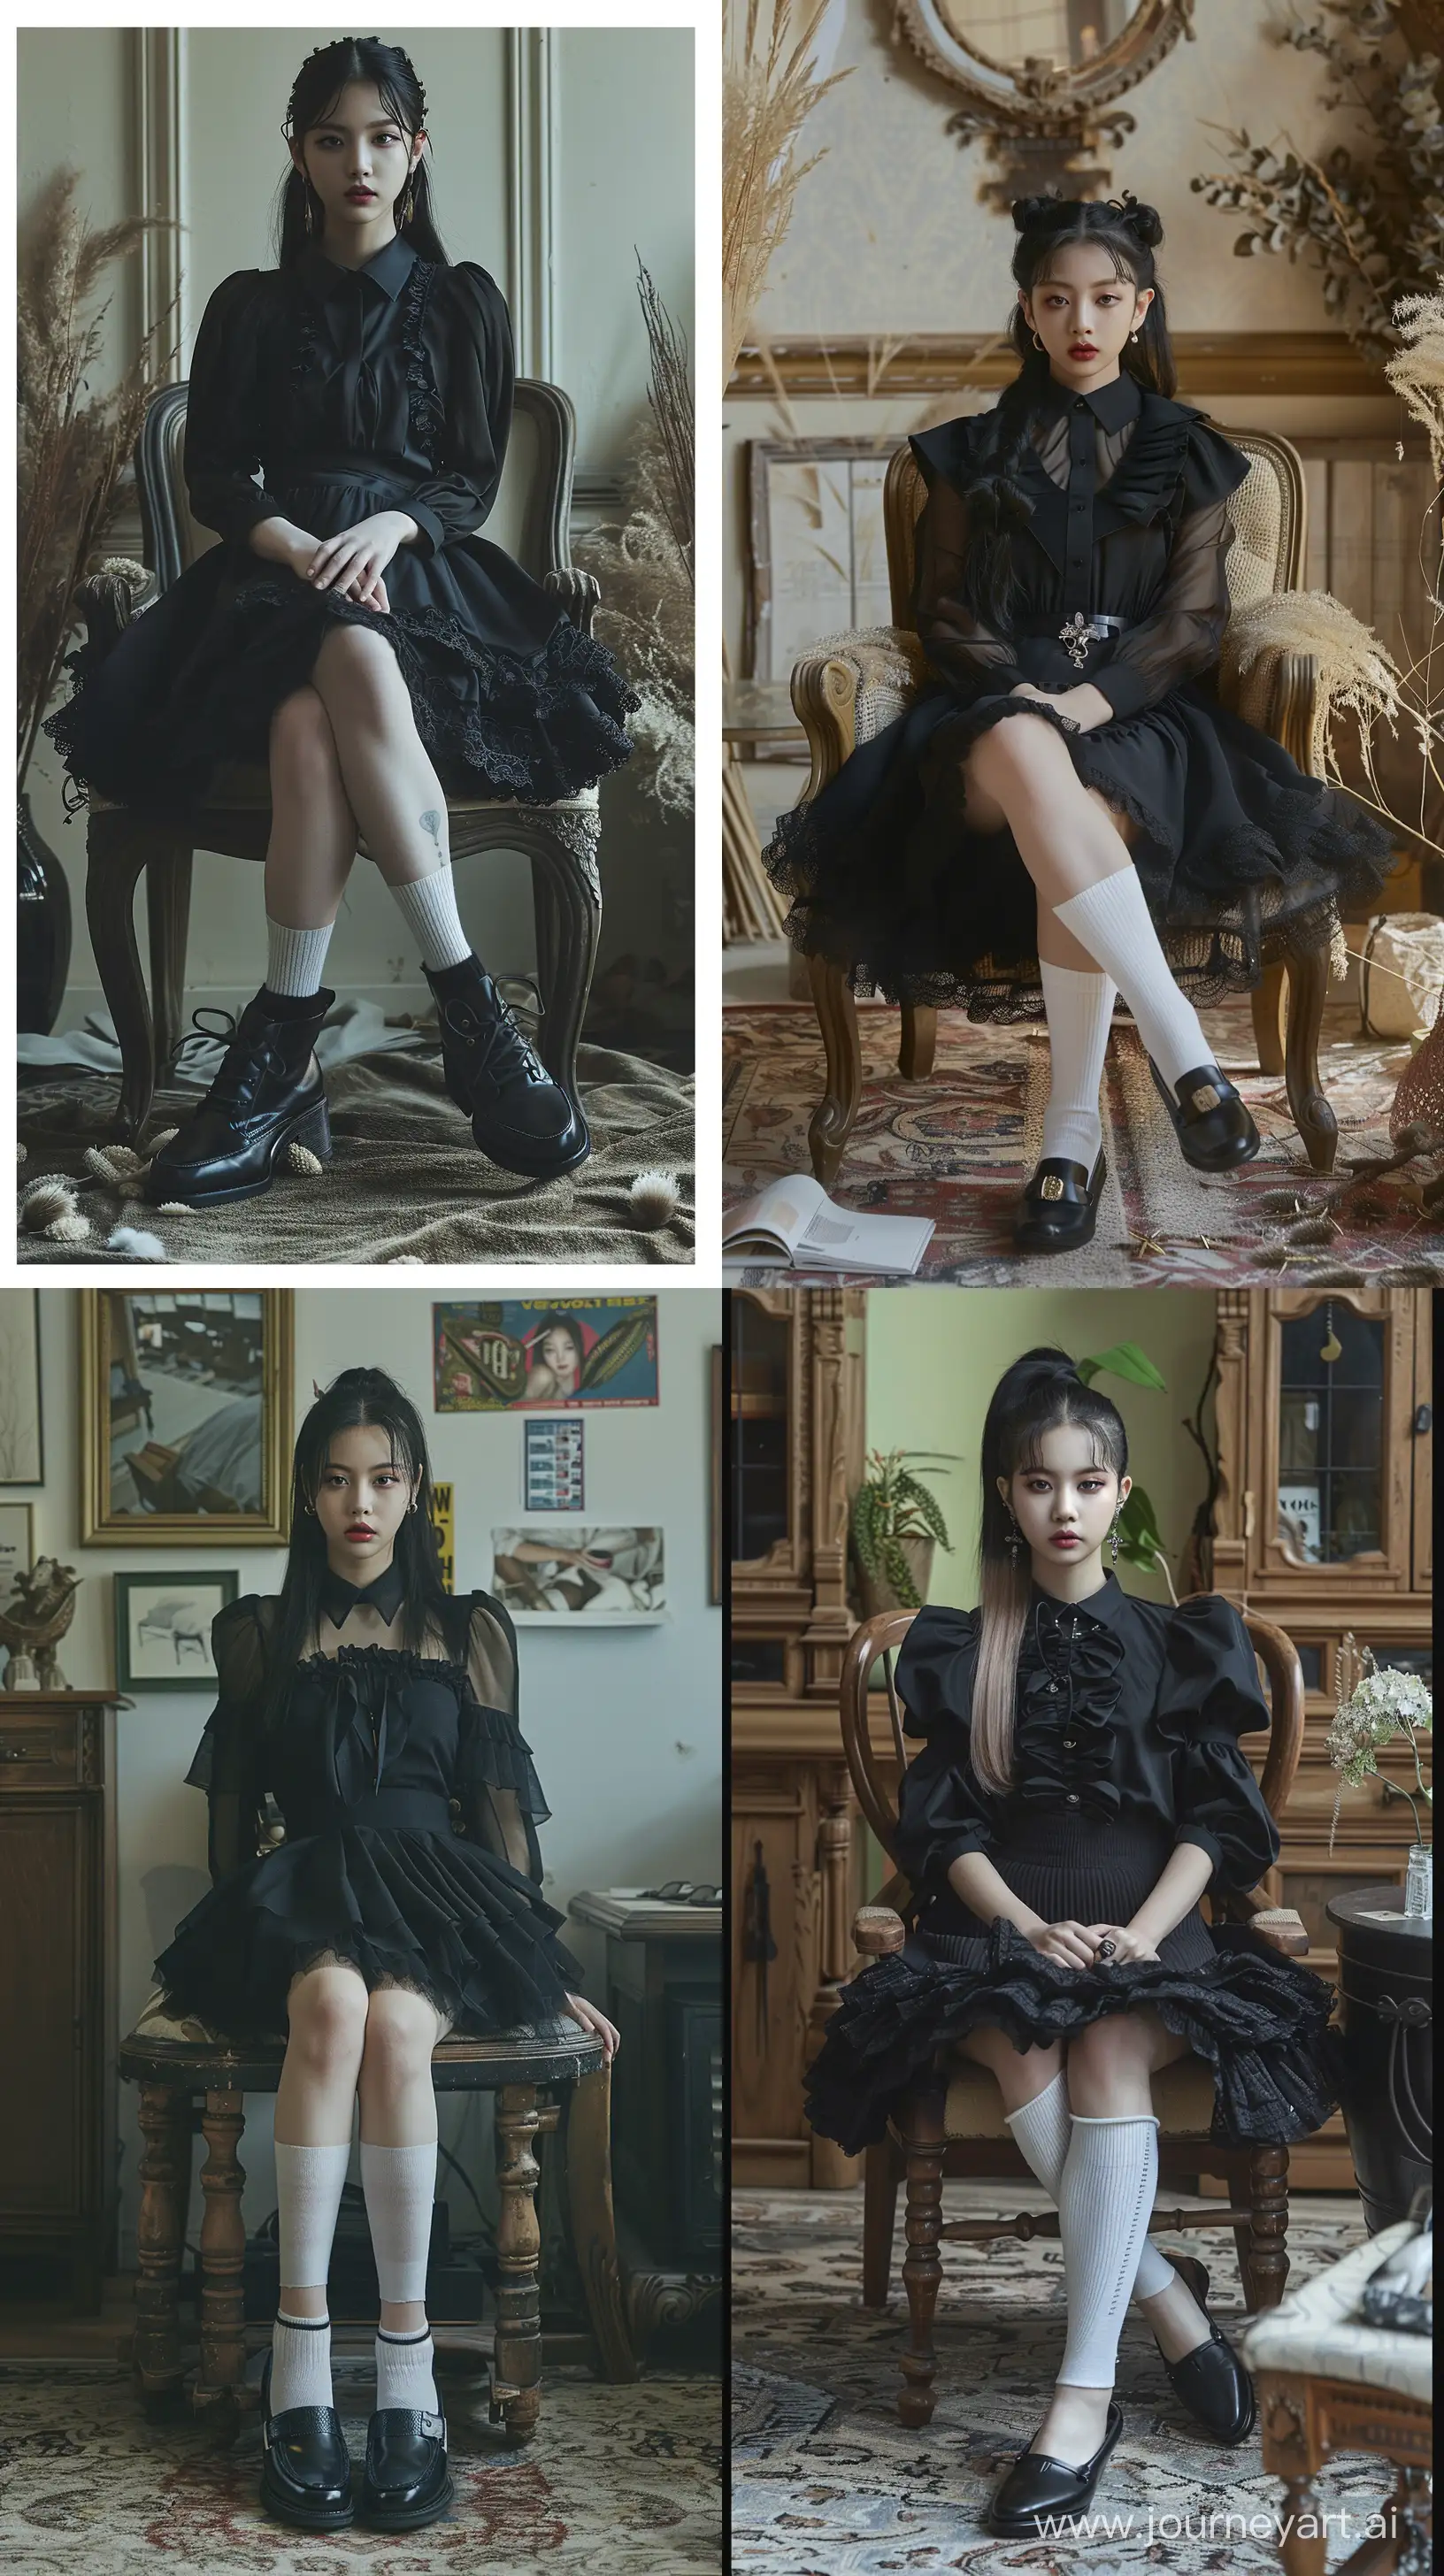 High resolution fashion photo of jennie blackpink's full body shot, wearing black skirt and black blouse with black loafer shoes and white sock sit on chair,nature studio set,vogue megazine,pigtail black hair, in the style of jennie, mysterious nocturnal scenes, album covers, flickr --ar 9:16 --style raw --stylize 250 --v 6